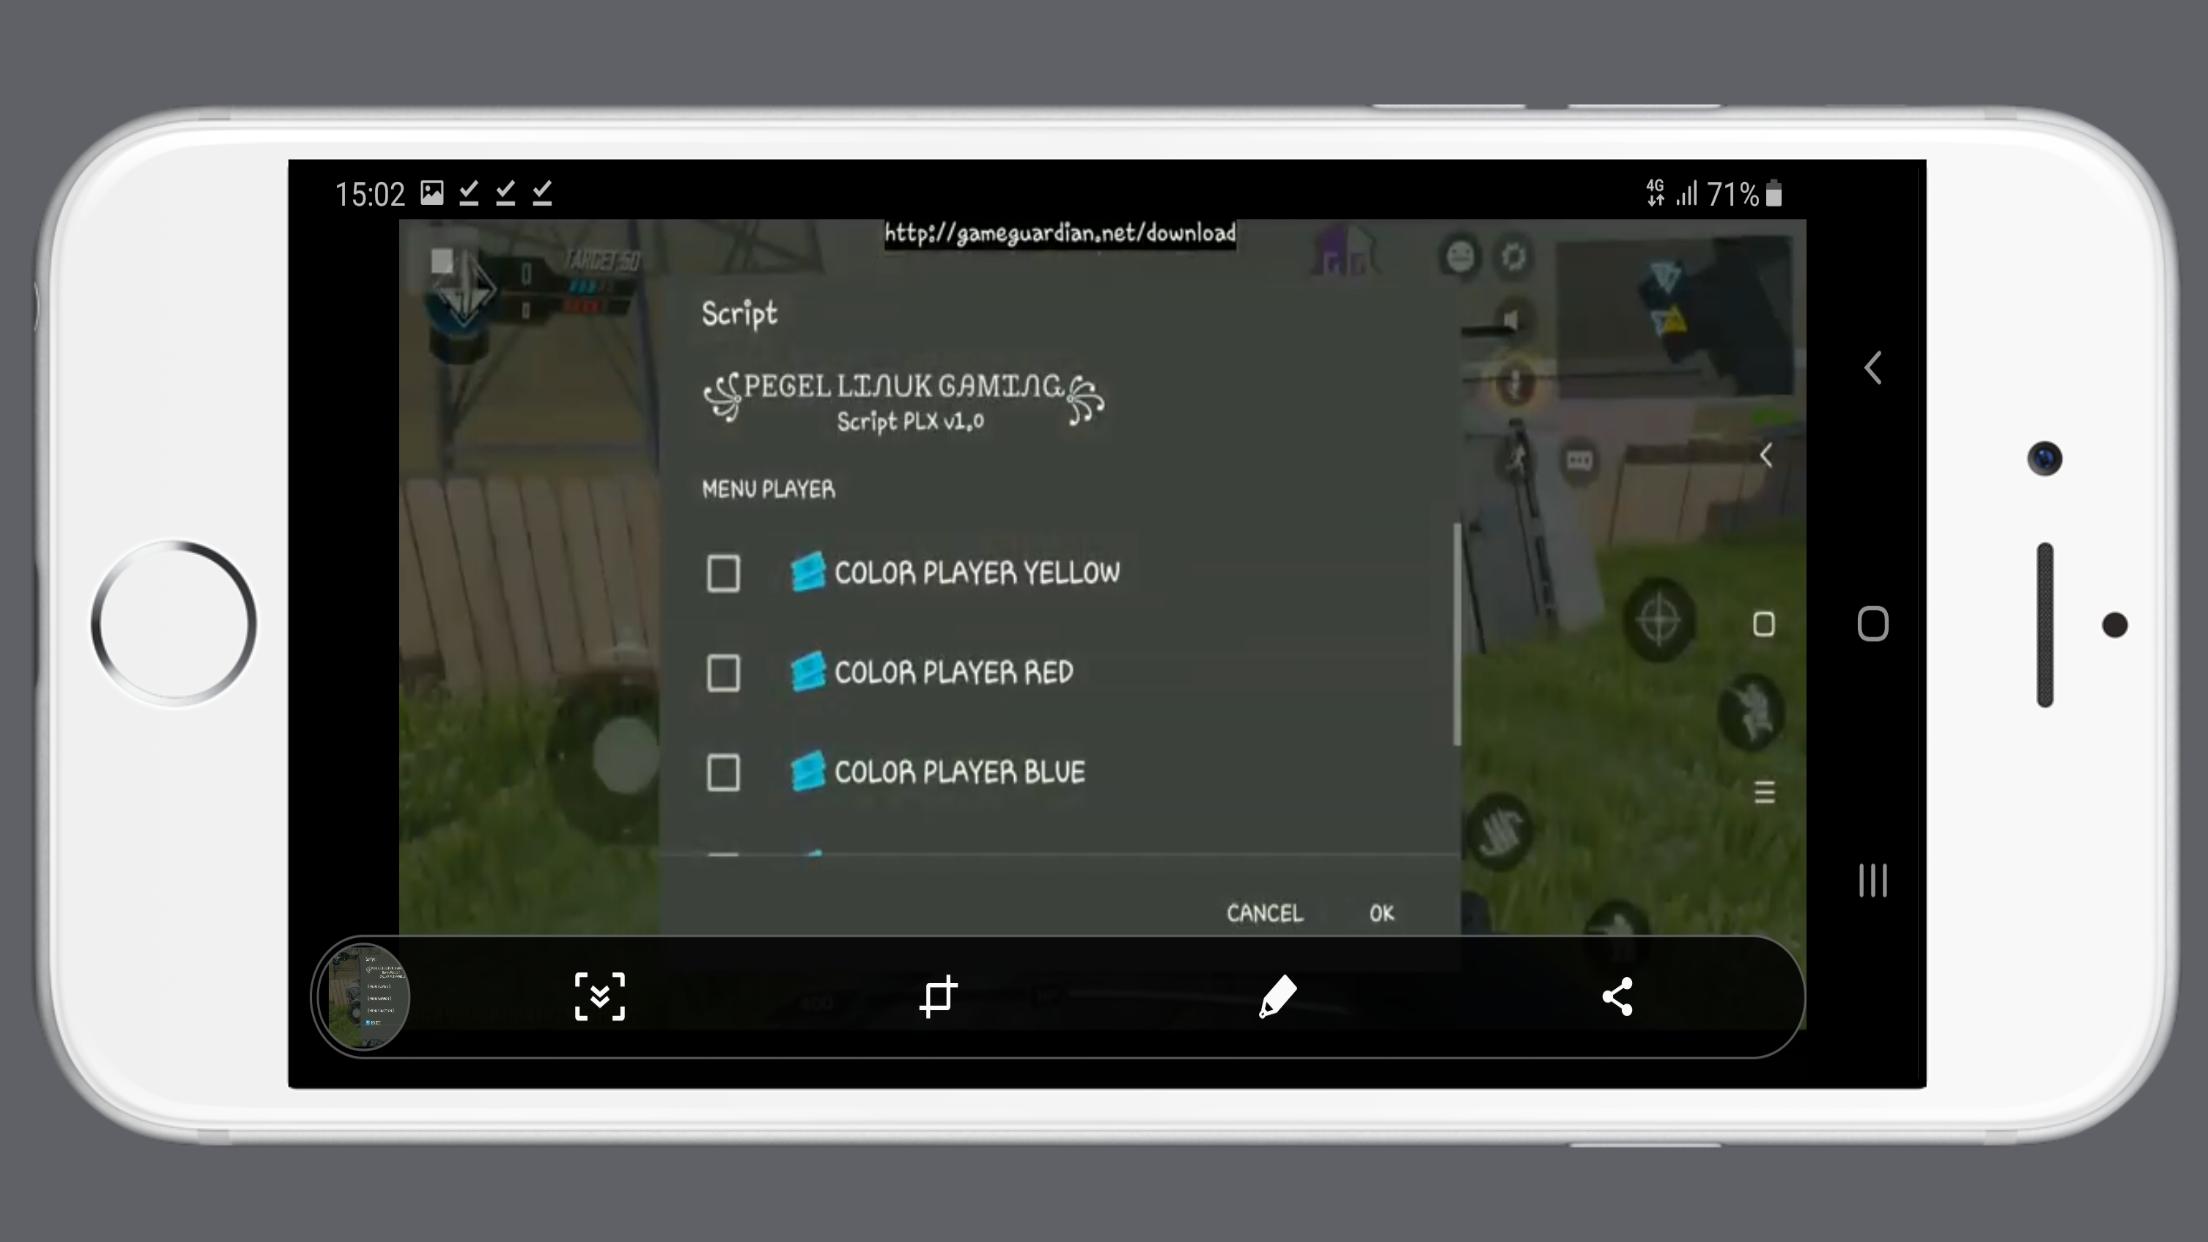 Game guardian scripts. Скрин ale. FX Player. PSS-geo.